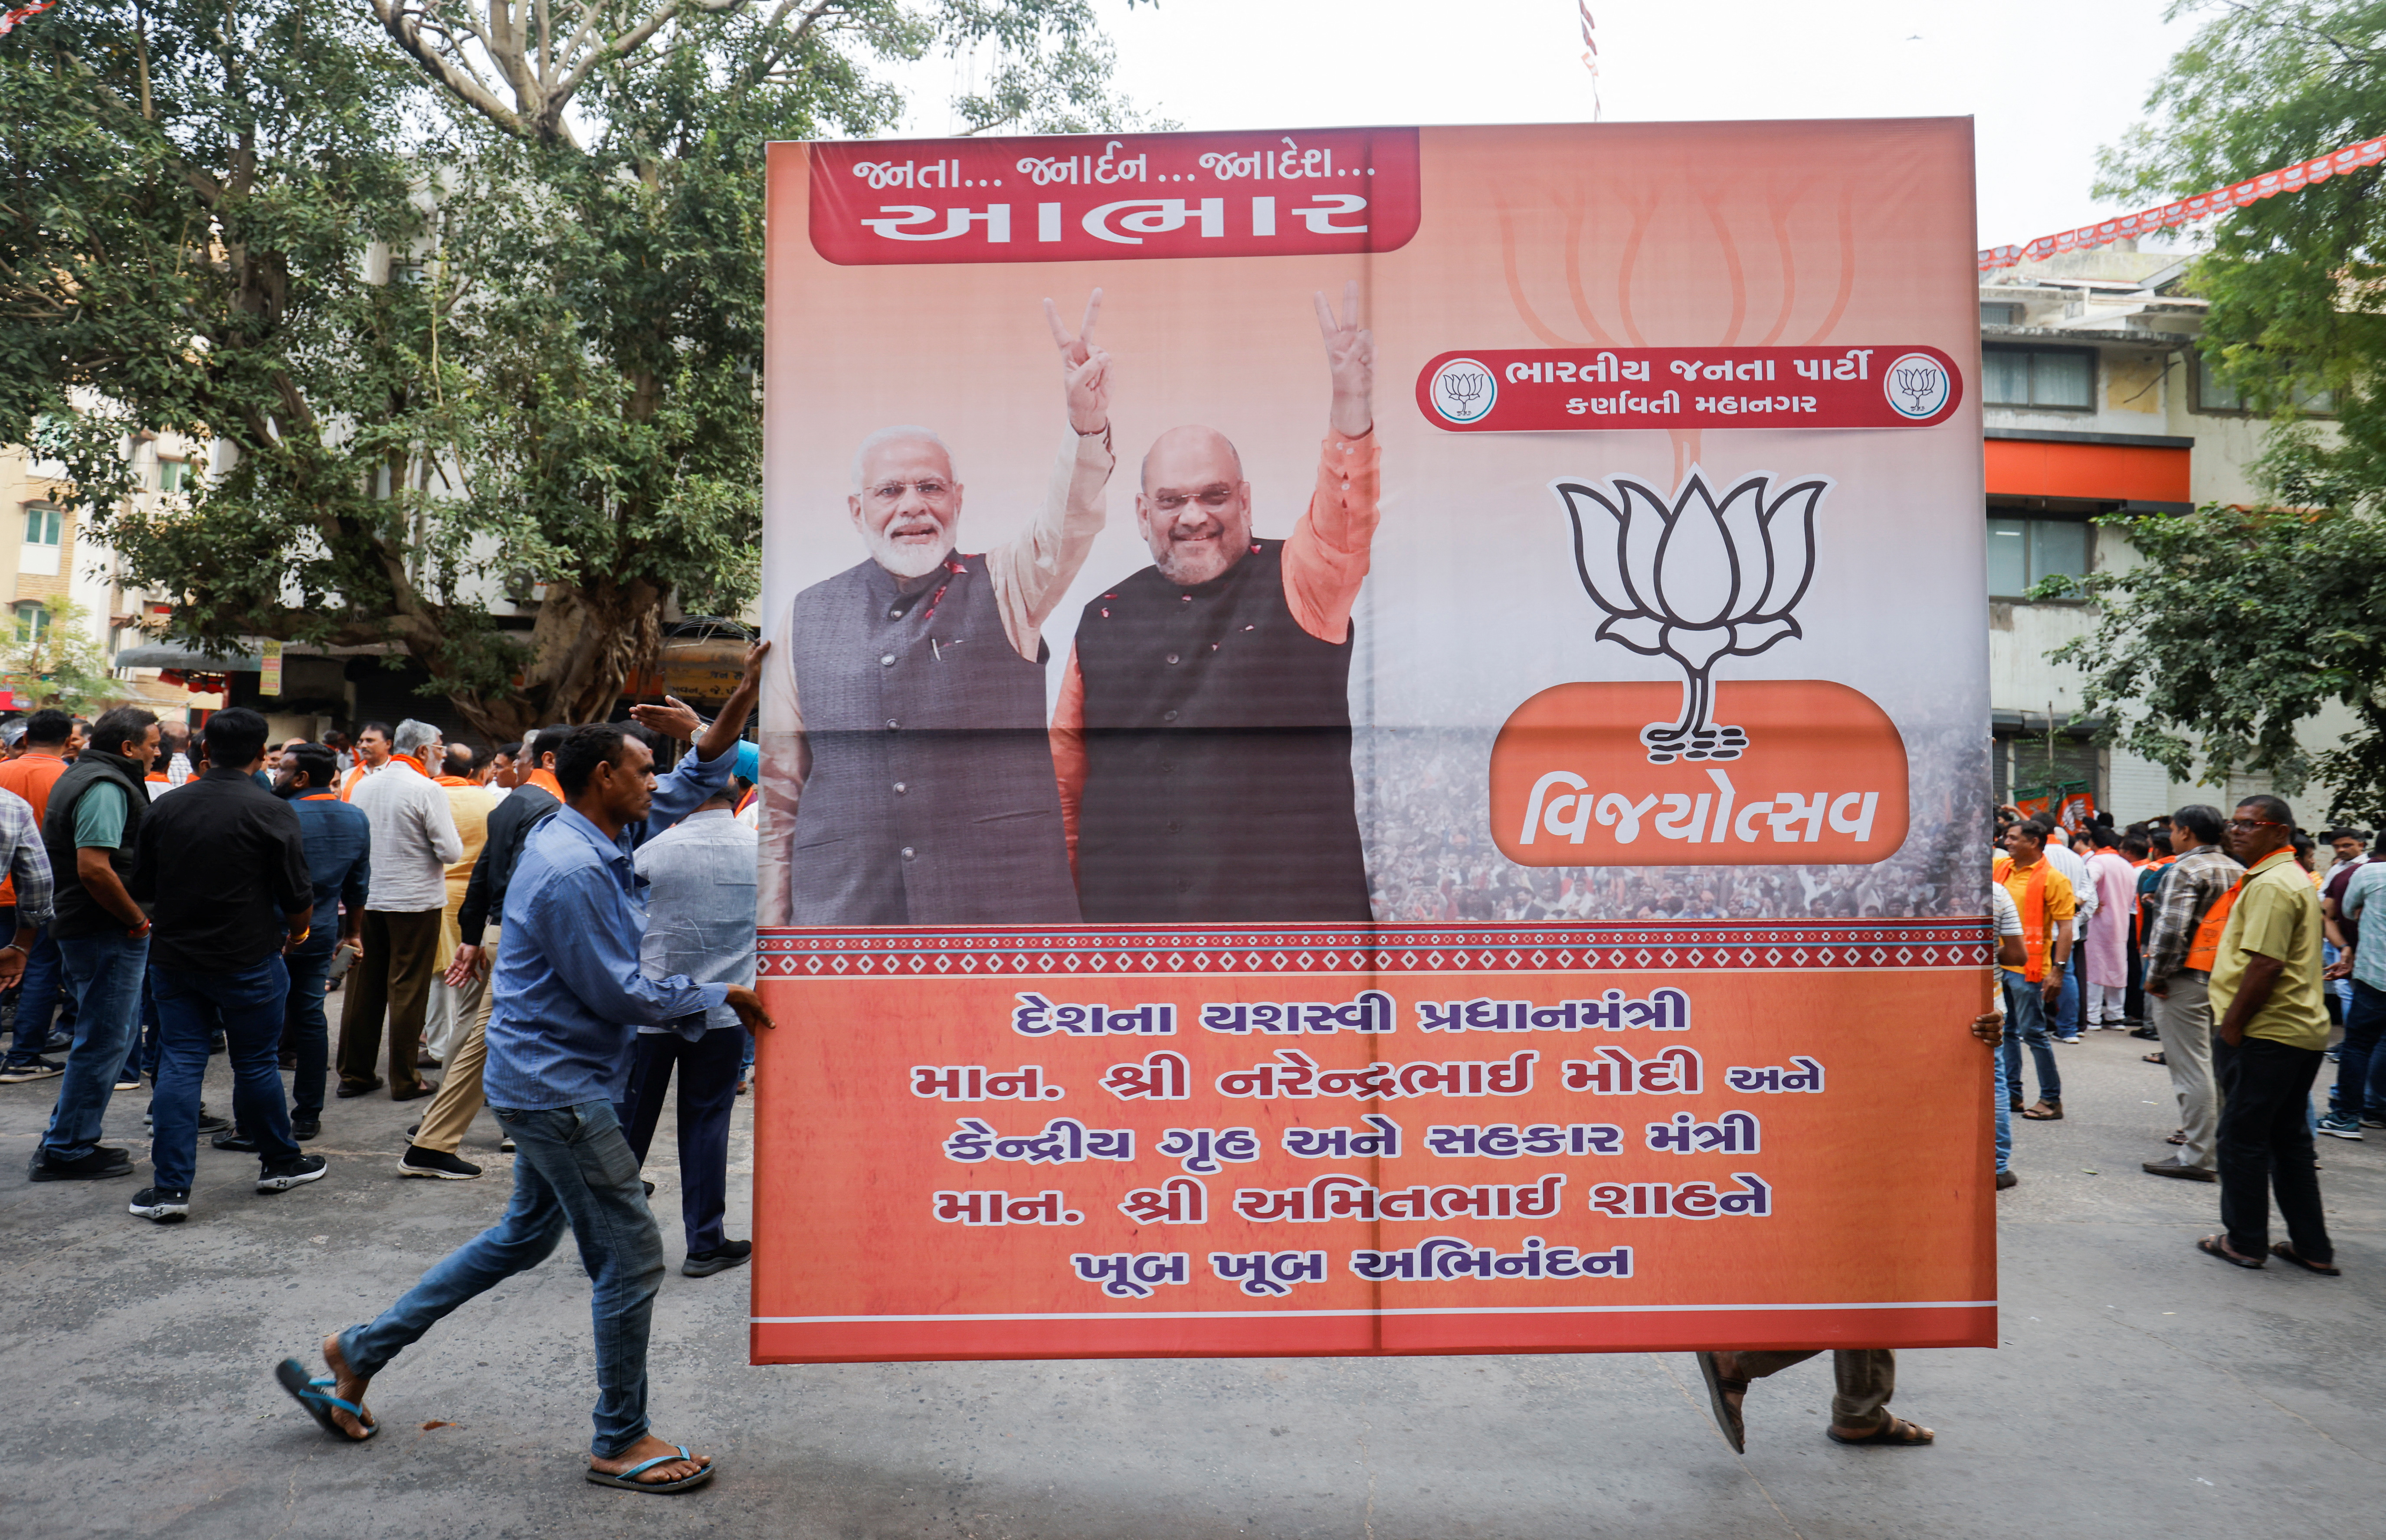 Supporters of India's ruling Bharatiya Janata Party (BJP) carry a hoarding of Indian Prime Minister Narendra Modi and Union Minister of Home Affairs Amit Shah for celebrations in Ahmedabad